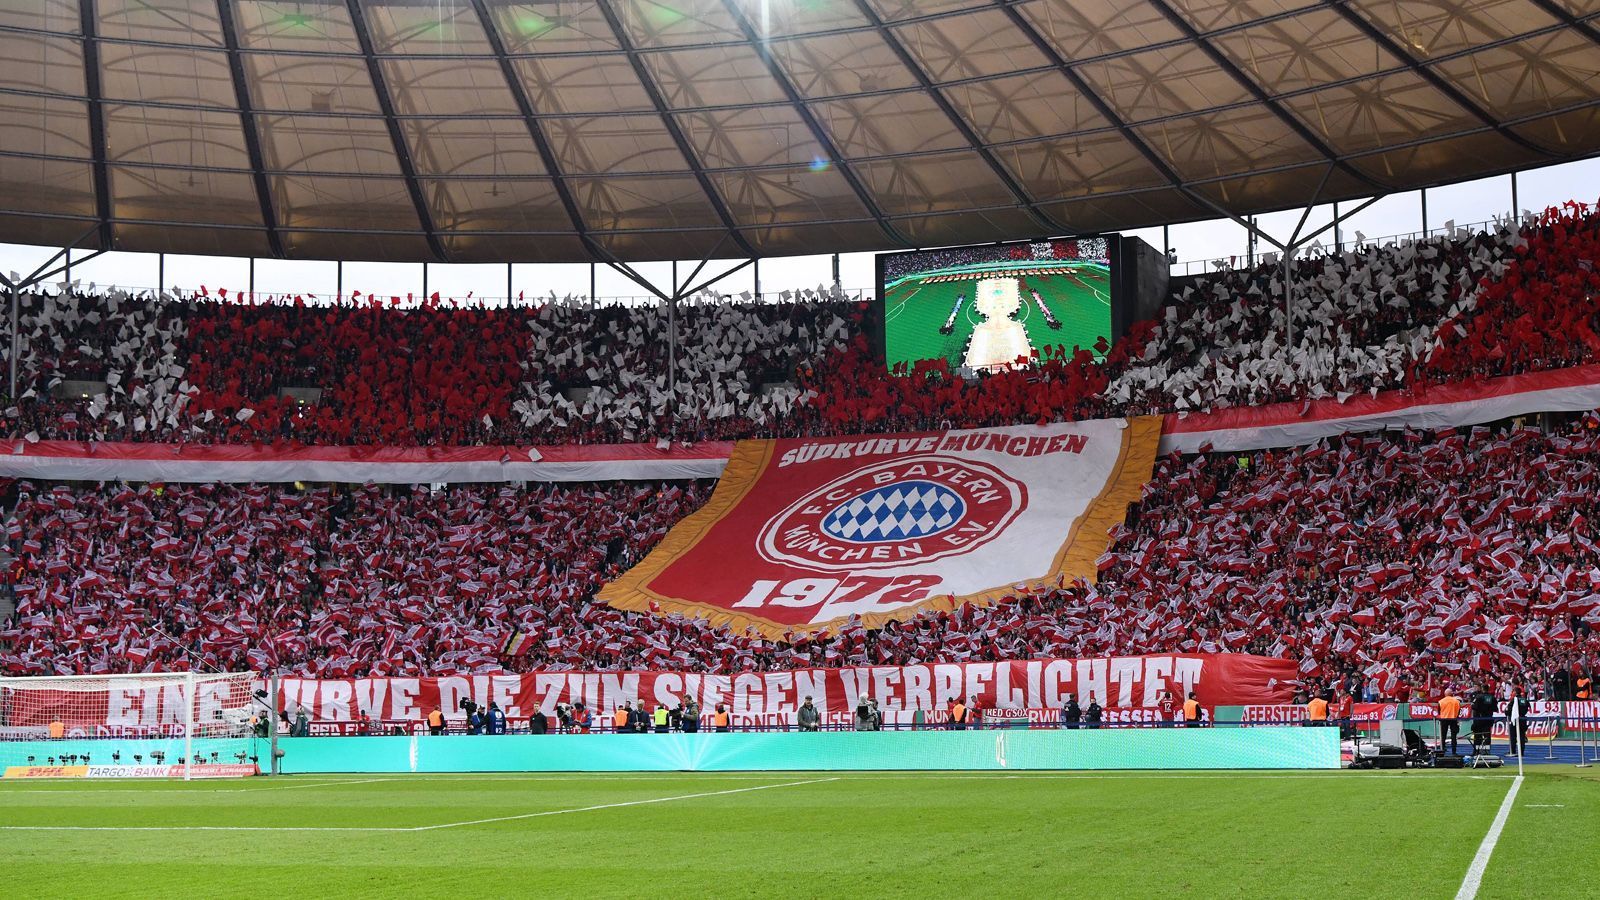 
                <strong>FC Bayern München</strong><br>
                Vereinshymne: "Stern des Südens" (Willy Astor), "Forever Number One" (Andrew White feat. Harry) 
              